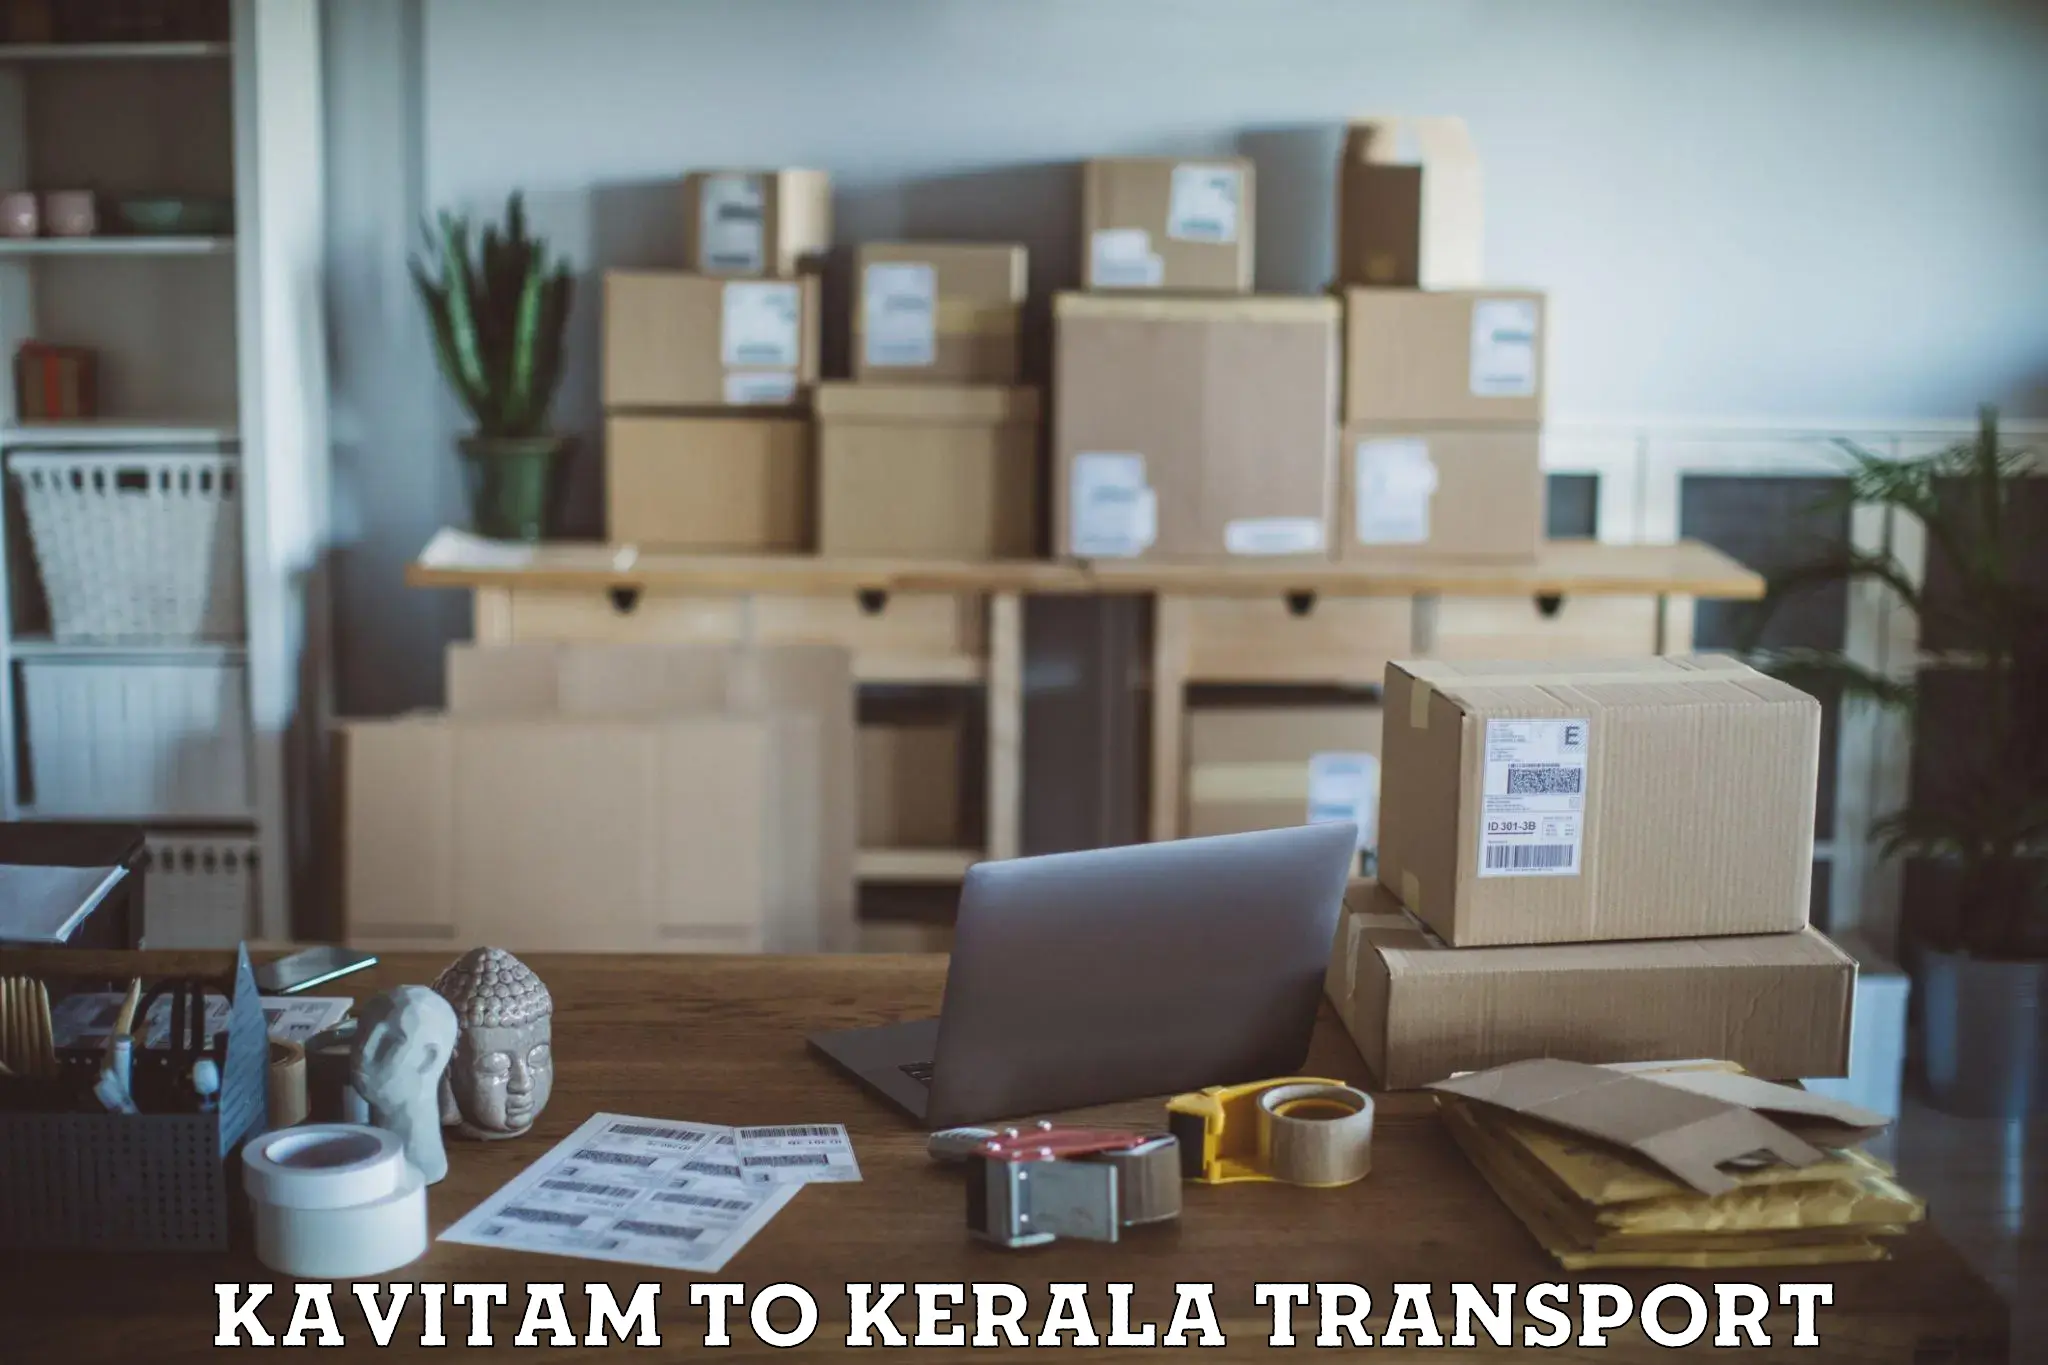 Container transport service Kavitam to Chungathara